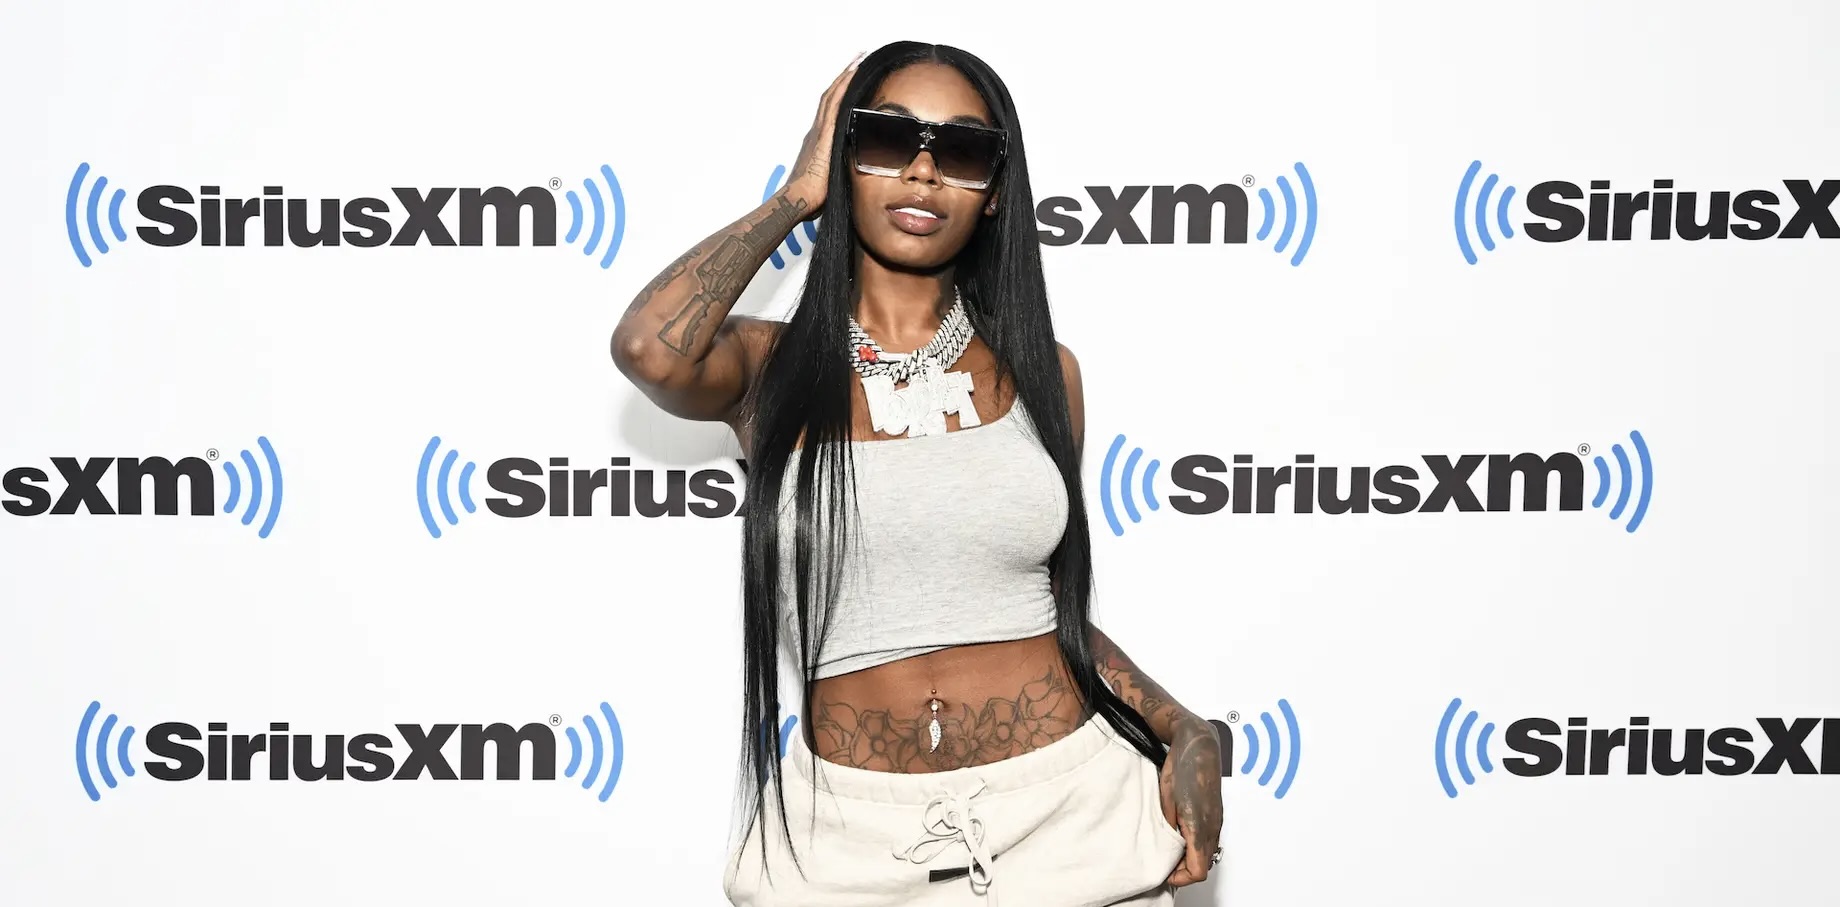 Asian Doll Says OnlyFans Paid Her $500,000 to Join the Platform, Calls People Rapping at 30 ‘Crazy’